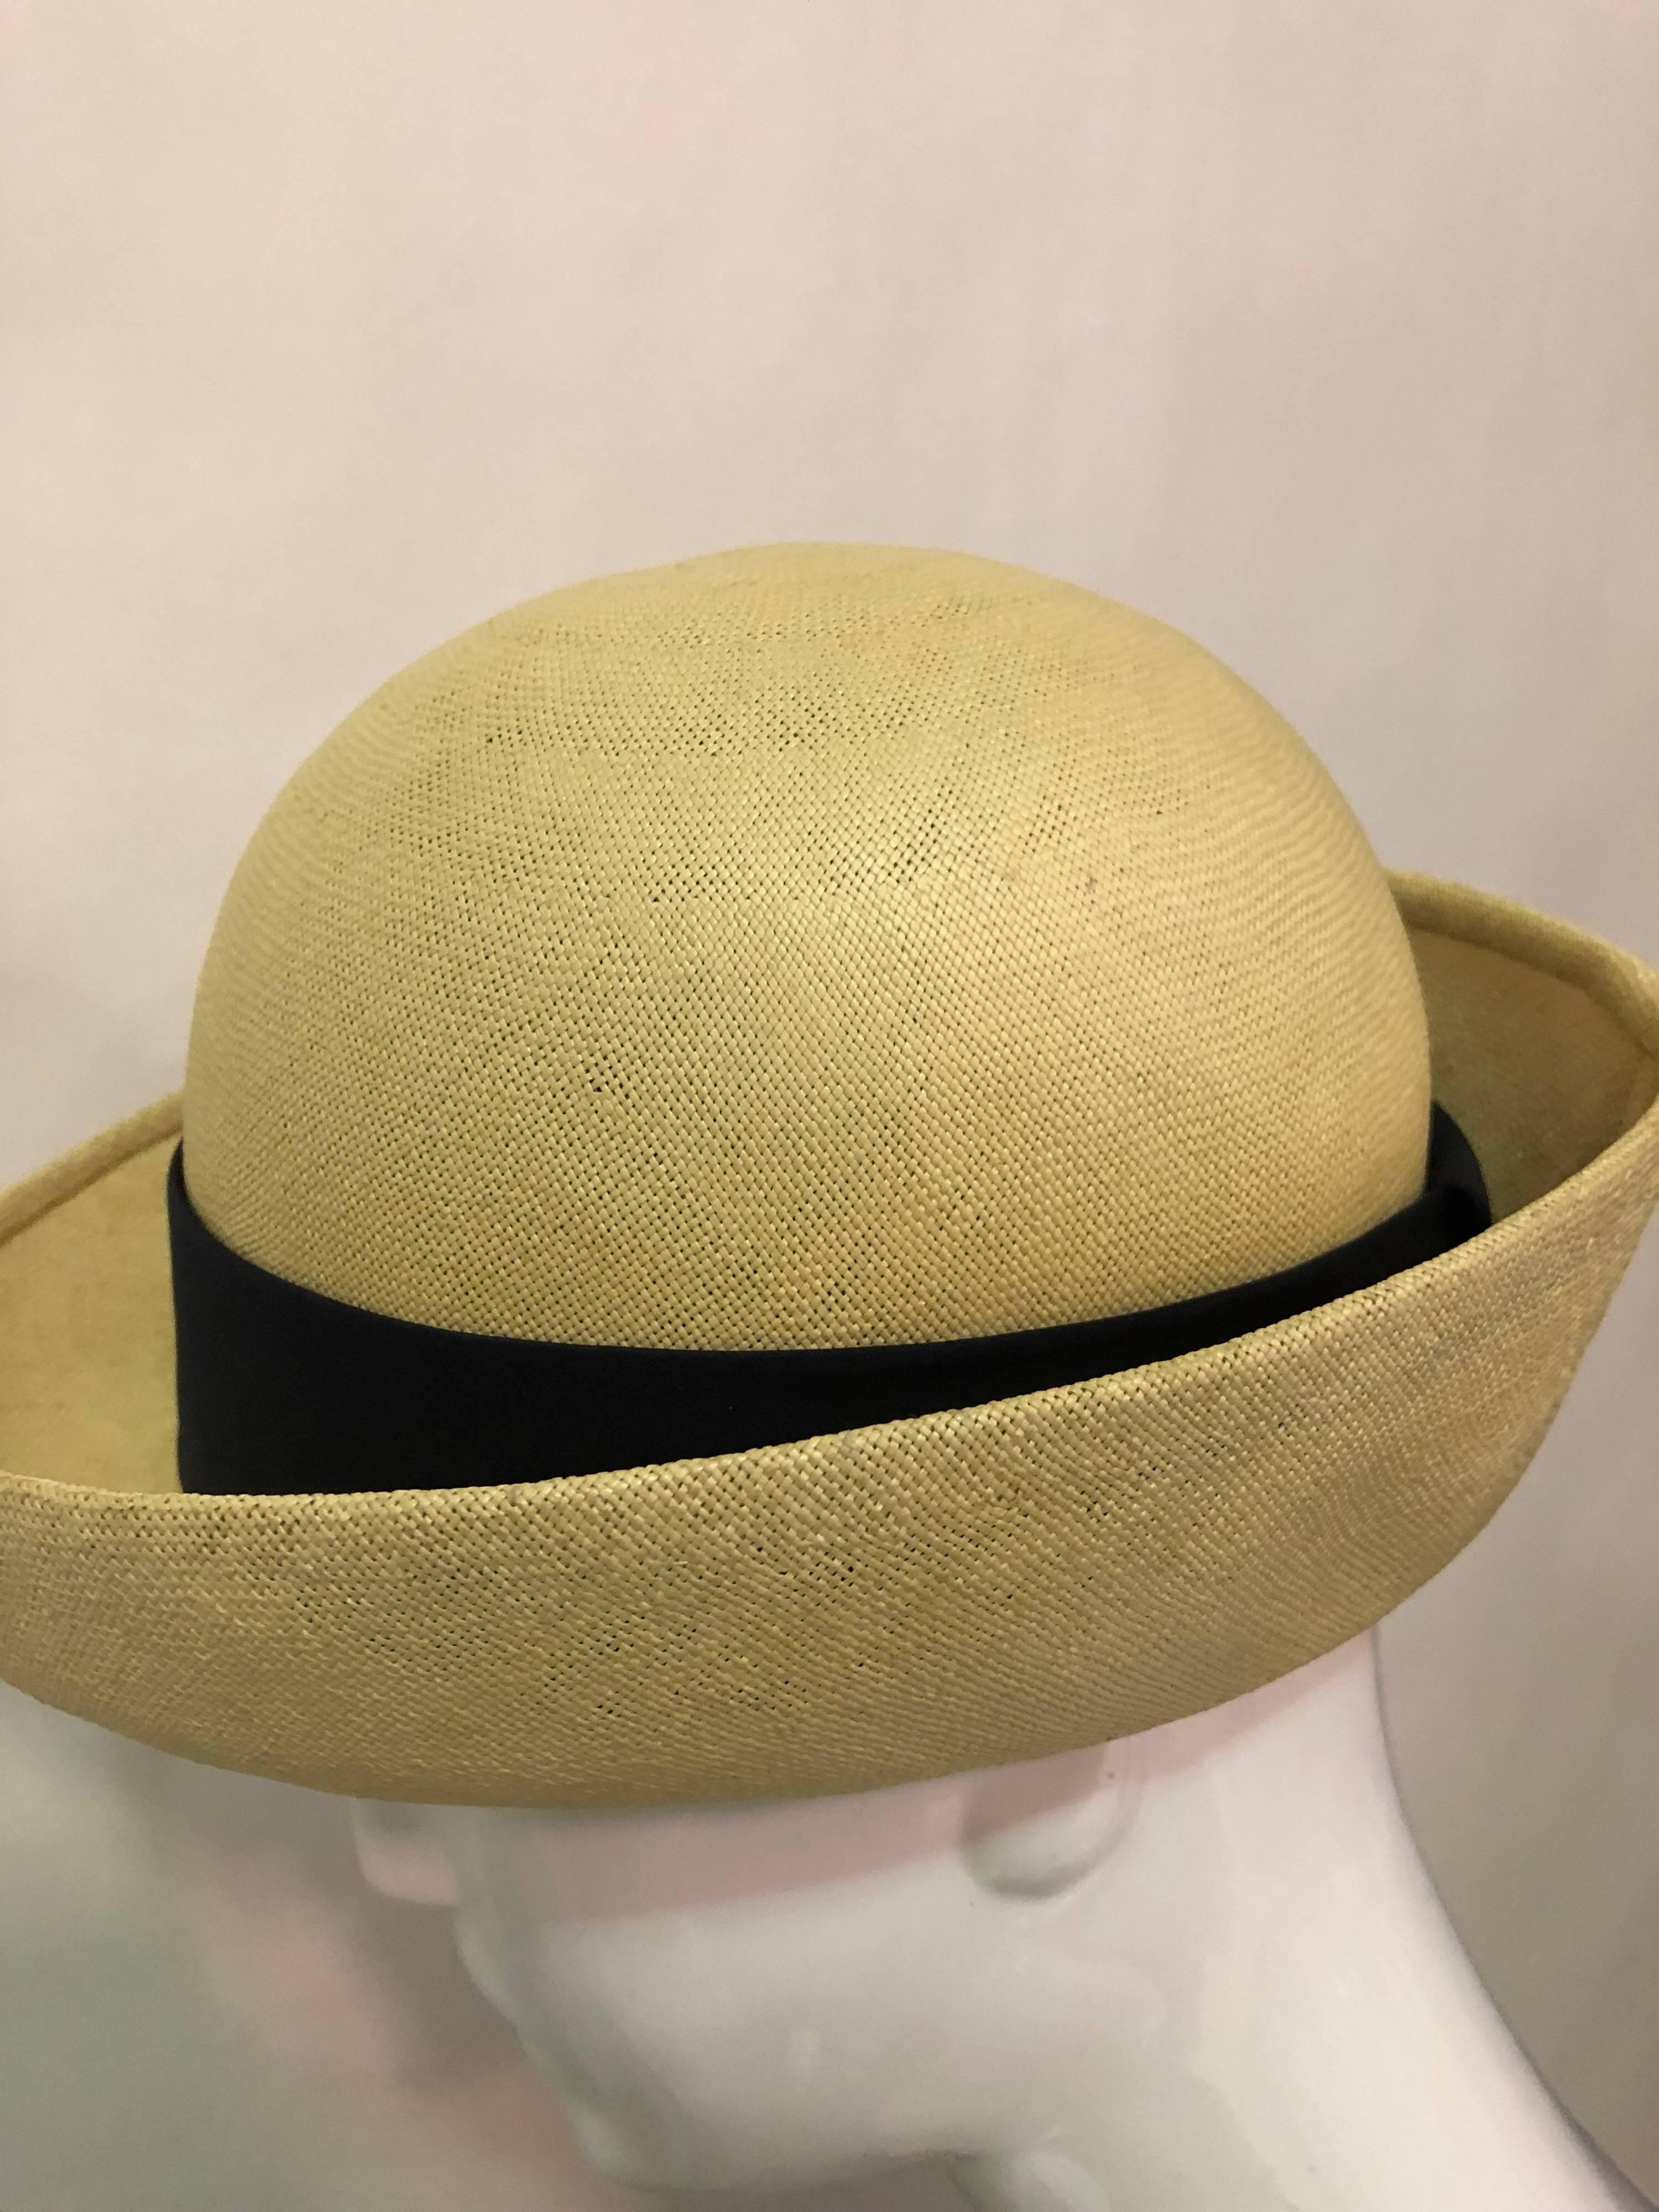 Galanos Panama Weave Boater Style Tailored Summer Hat, 1960s  1